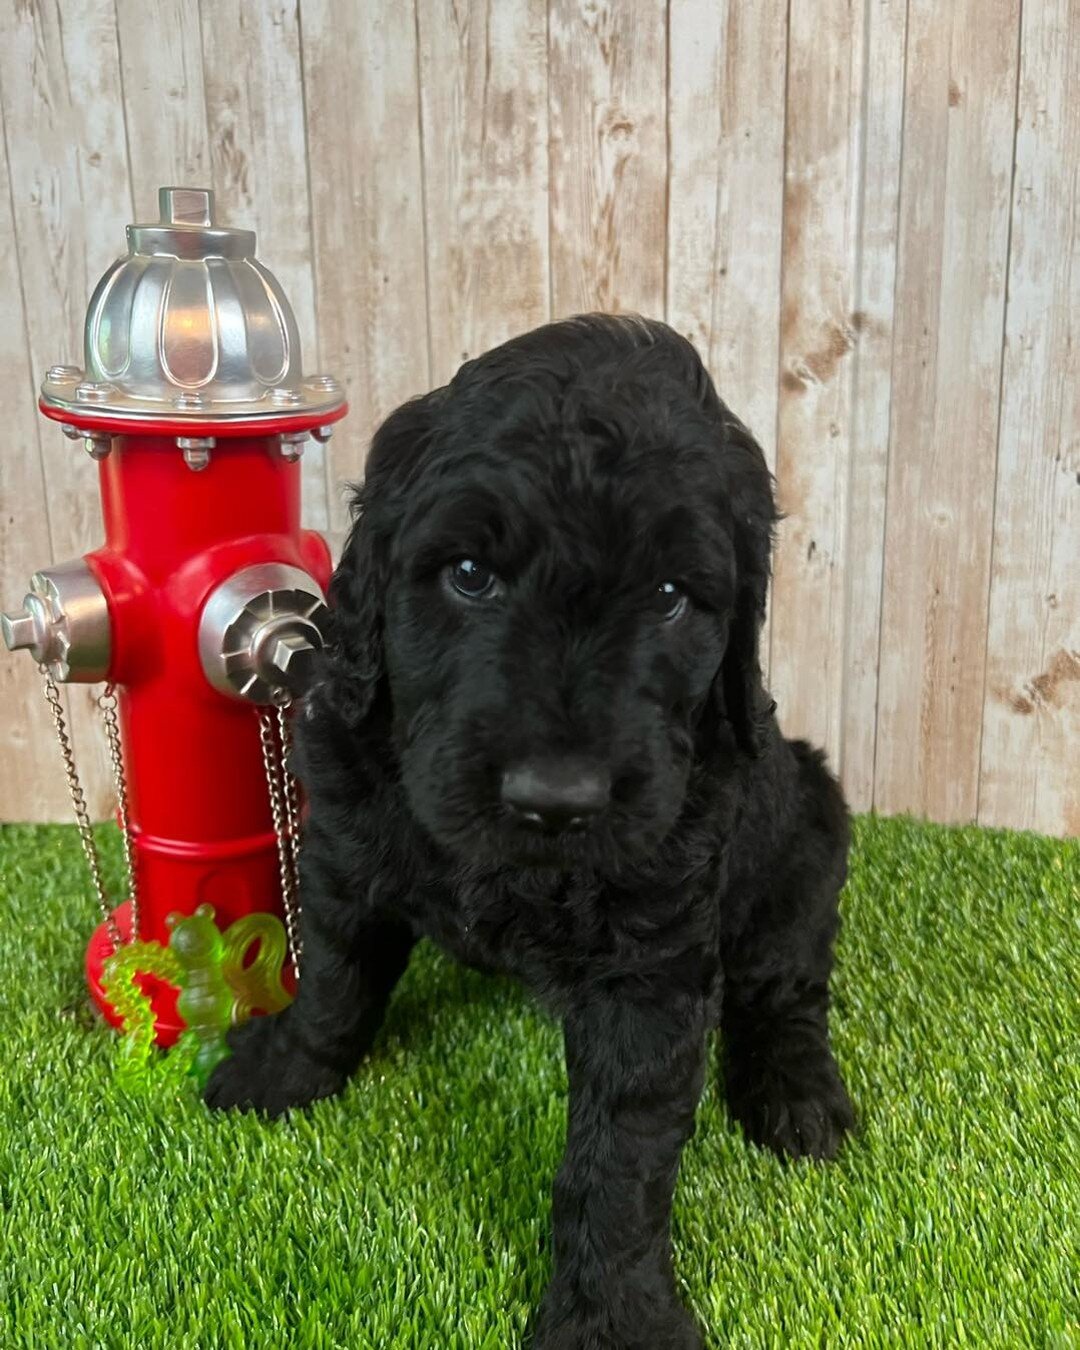 Husker is a hypoallergenic goldendoodle and still looking for his future family. He will be able to leave 2 weeks from today, September 11th. 

#midwestpuppy #goldendoodle #hypoallergenic #f1bdoodle #nebraskaraised #borninomaha #bestfriend #puppylife